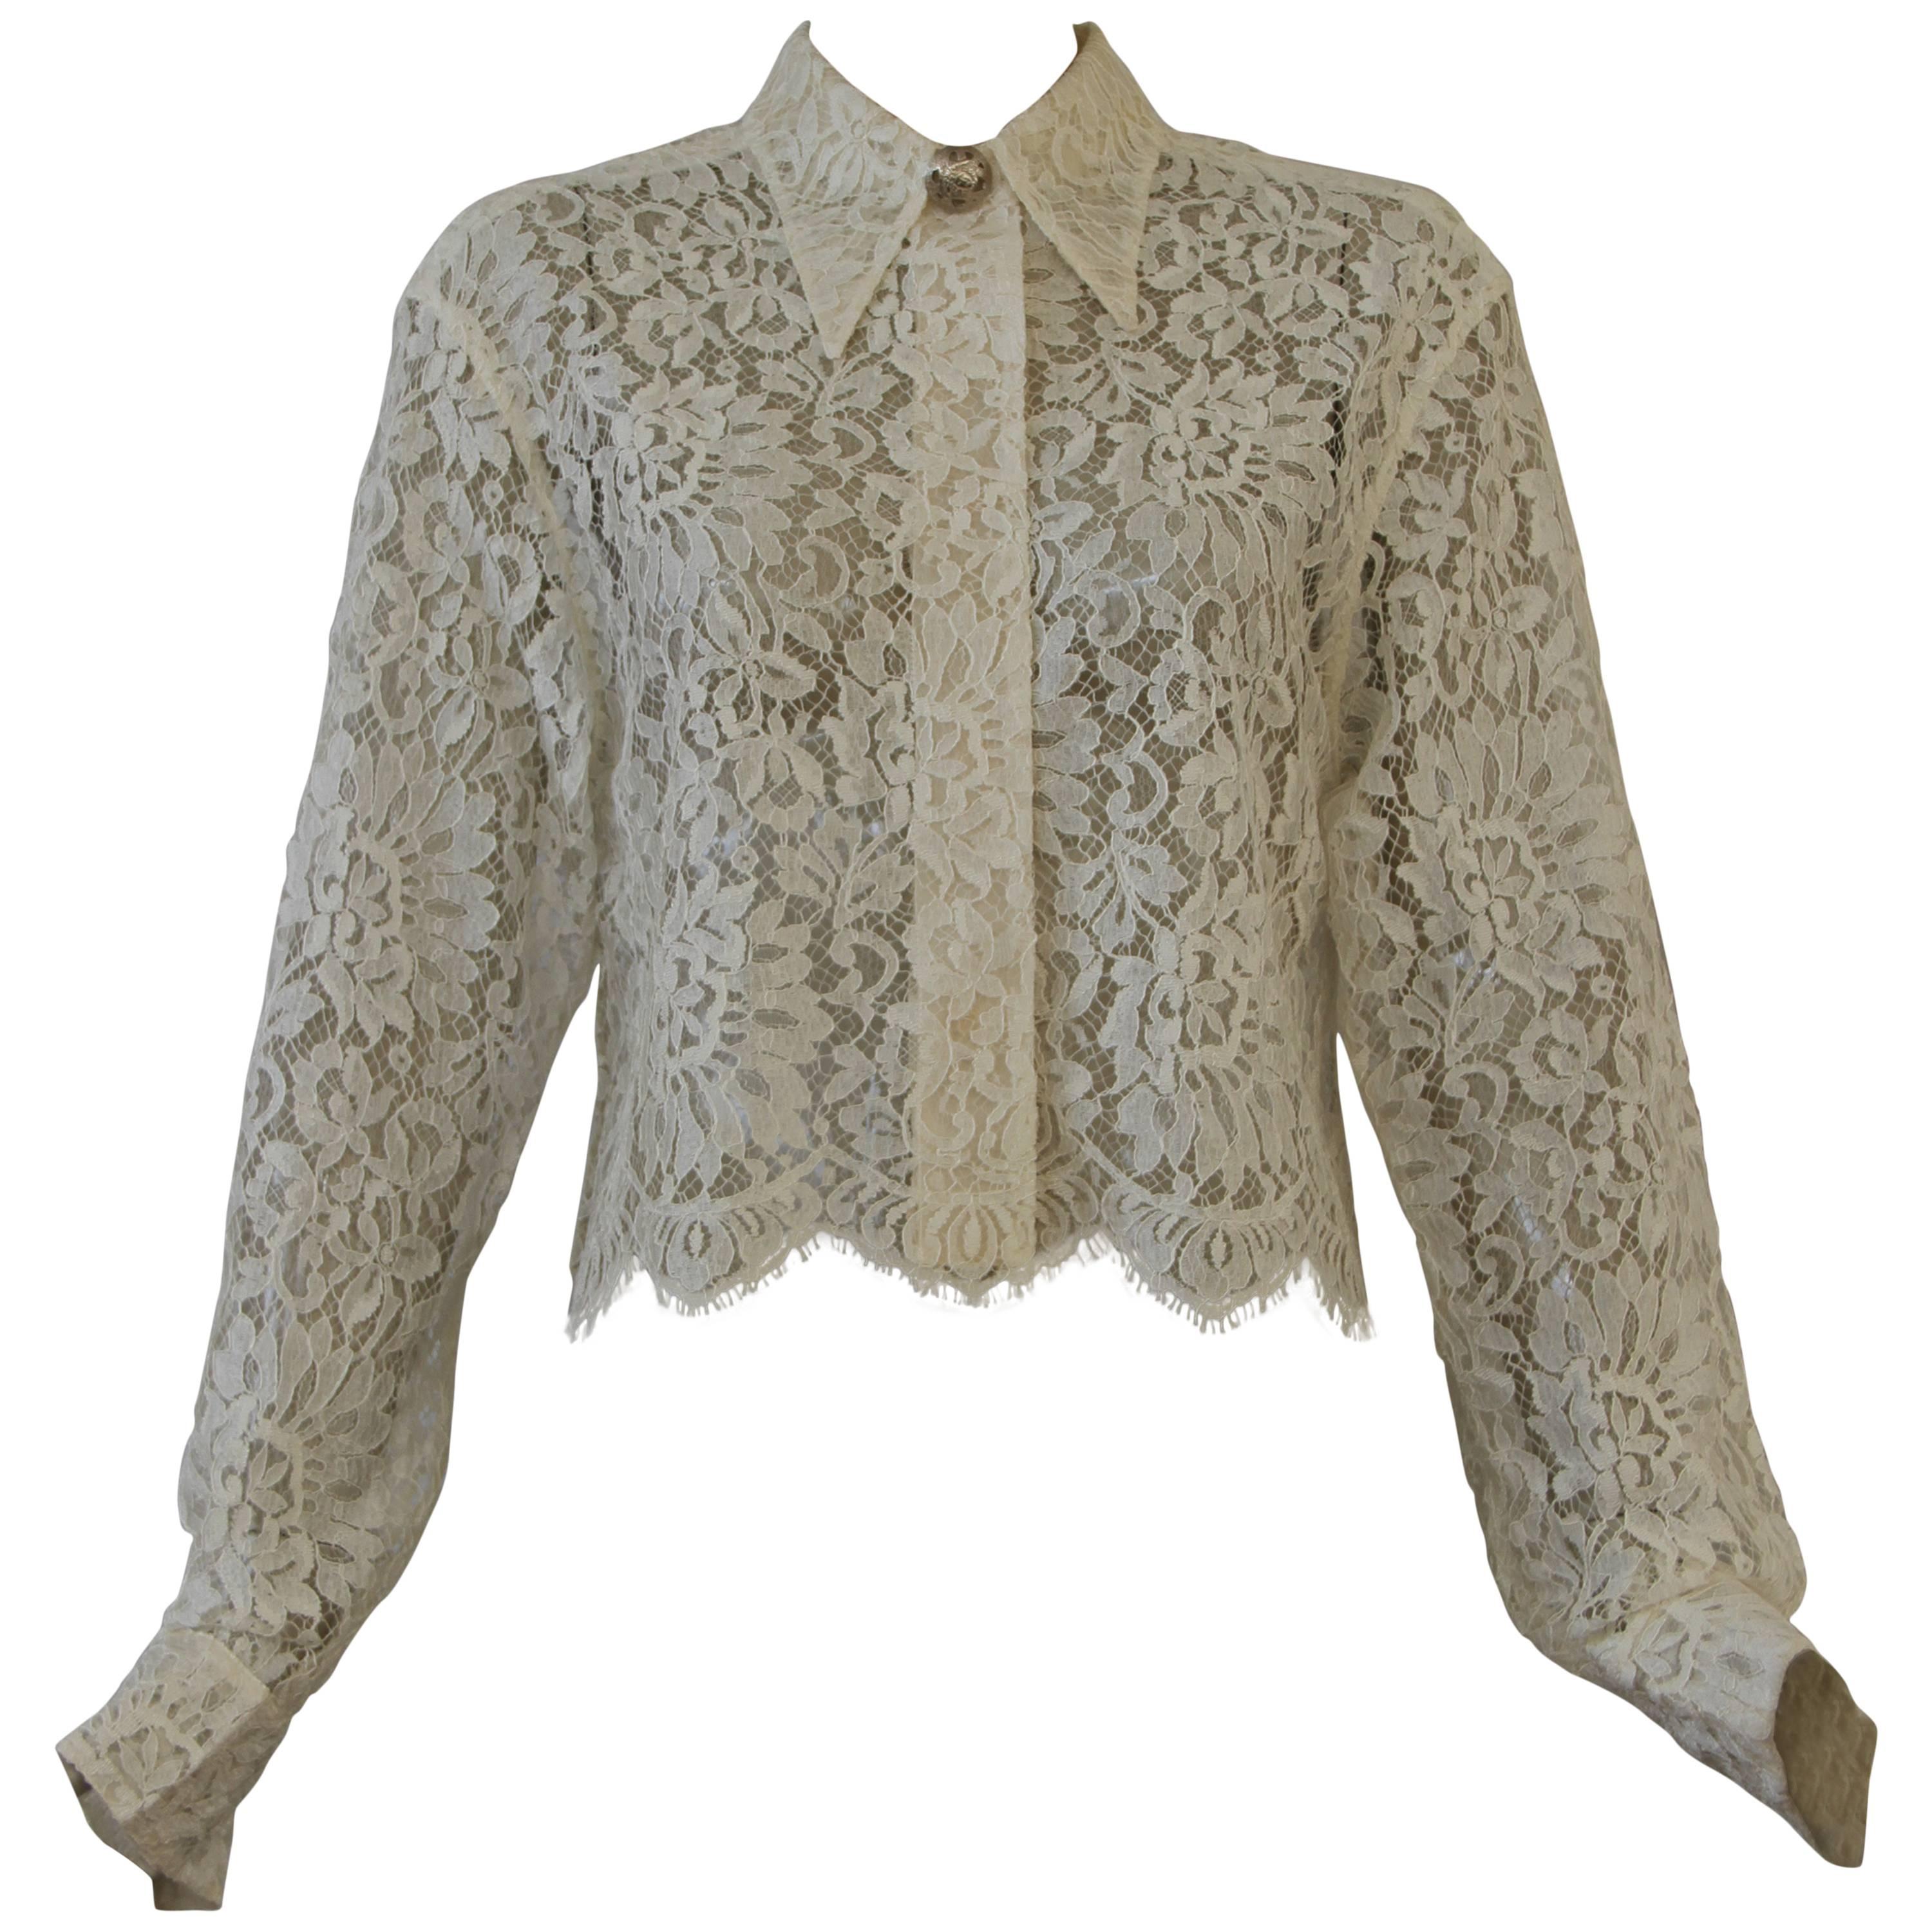 Gianni Versace Punk Lace Cropped Shirt Spring 1994 For Sale